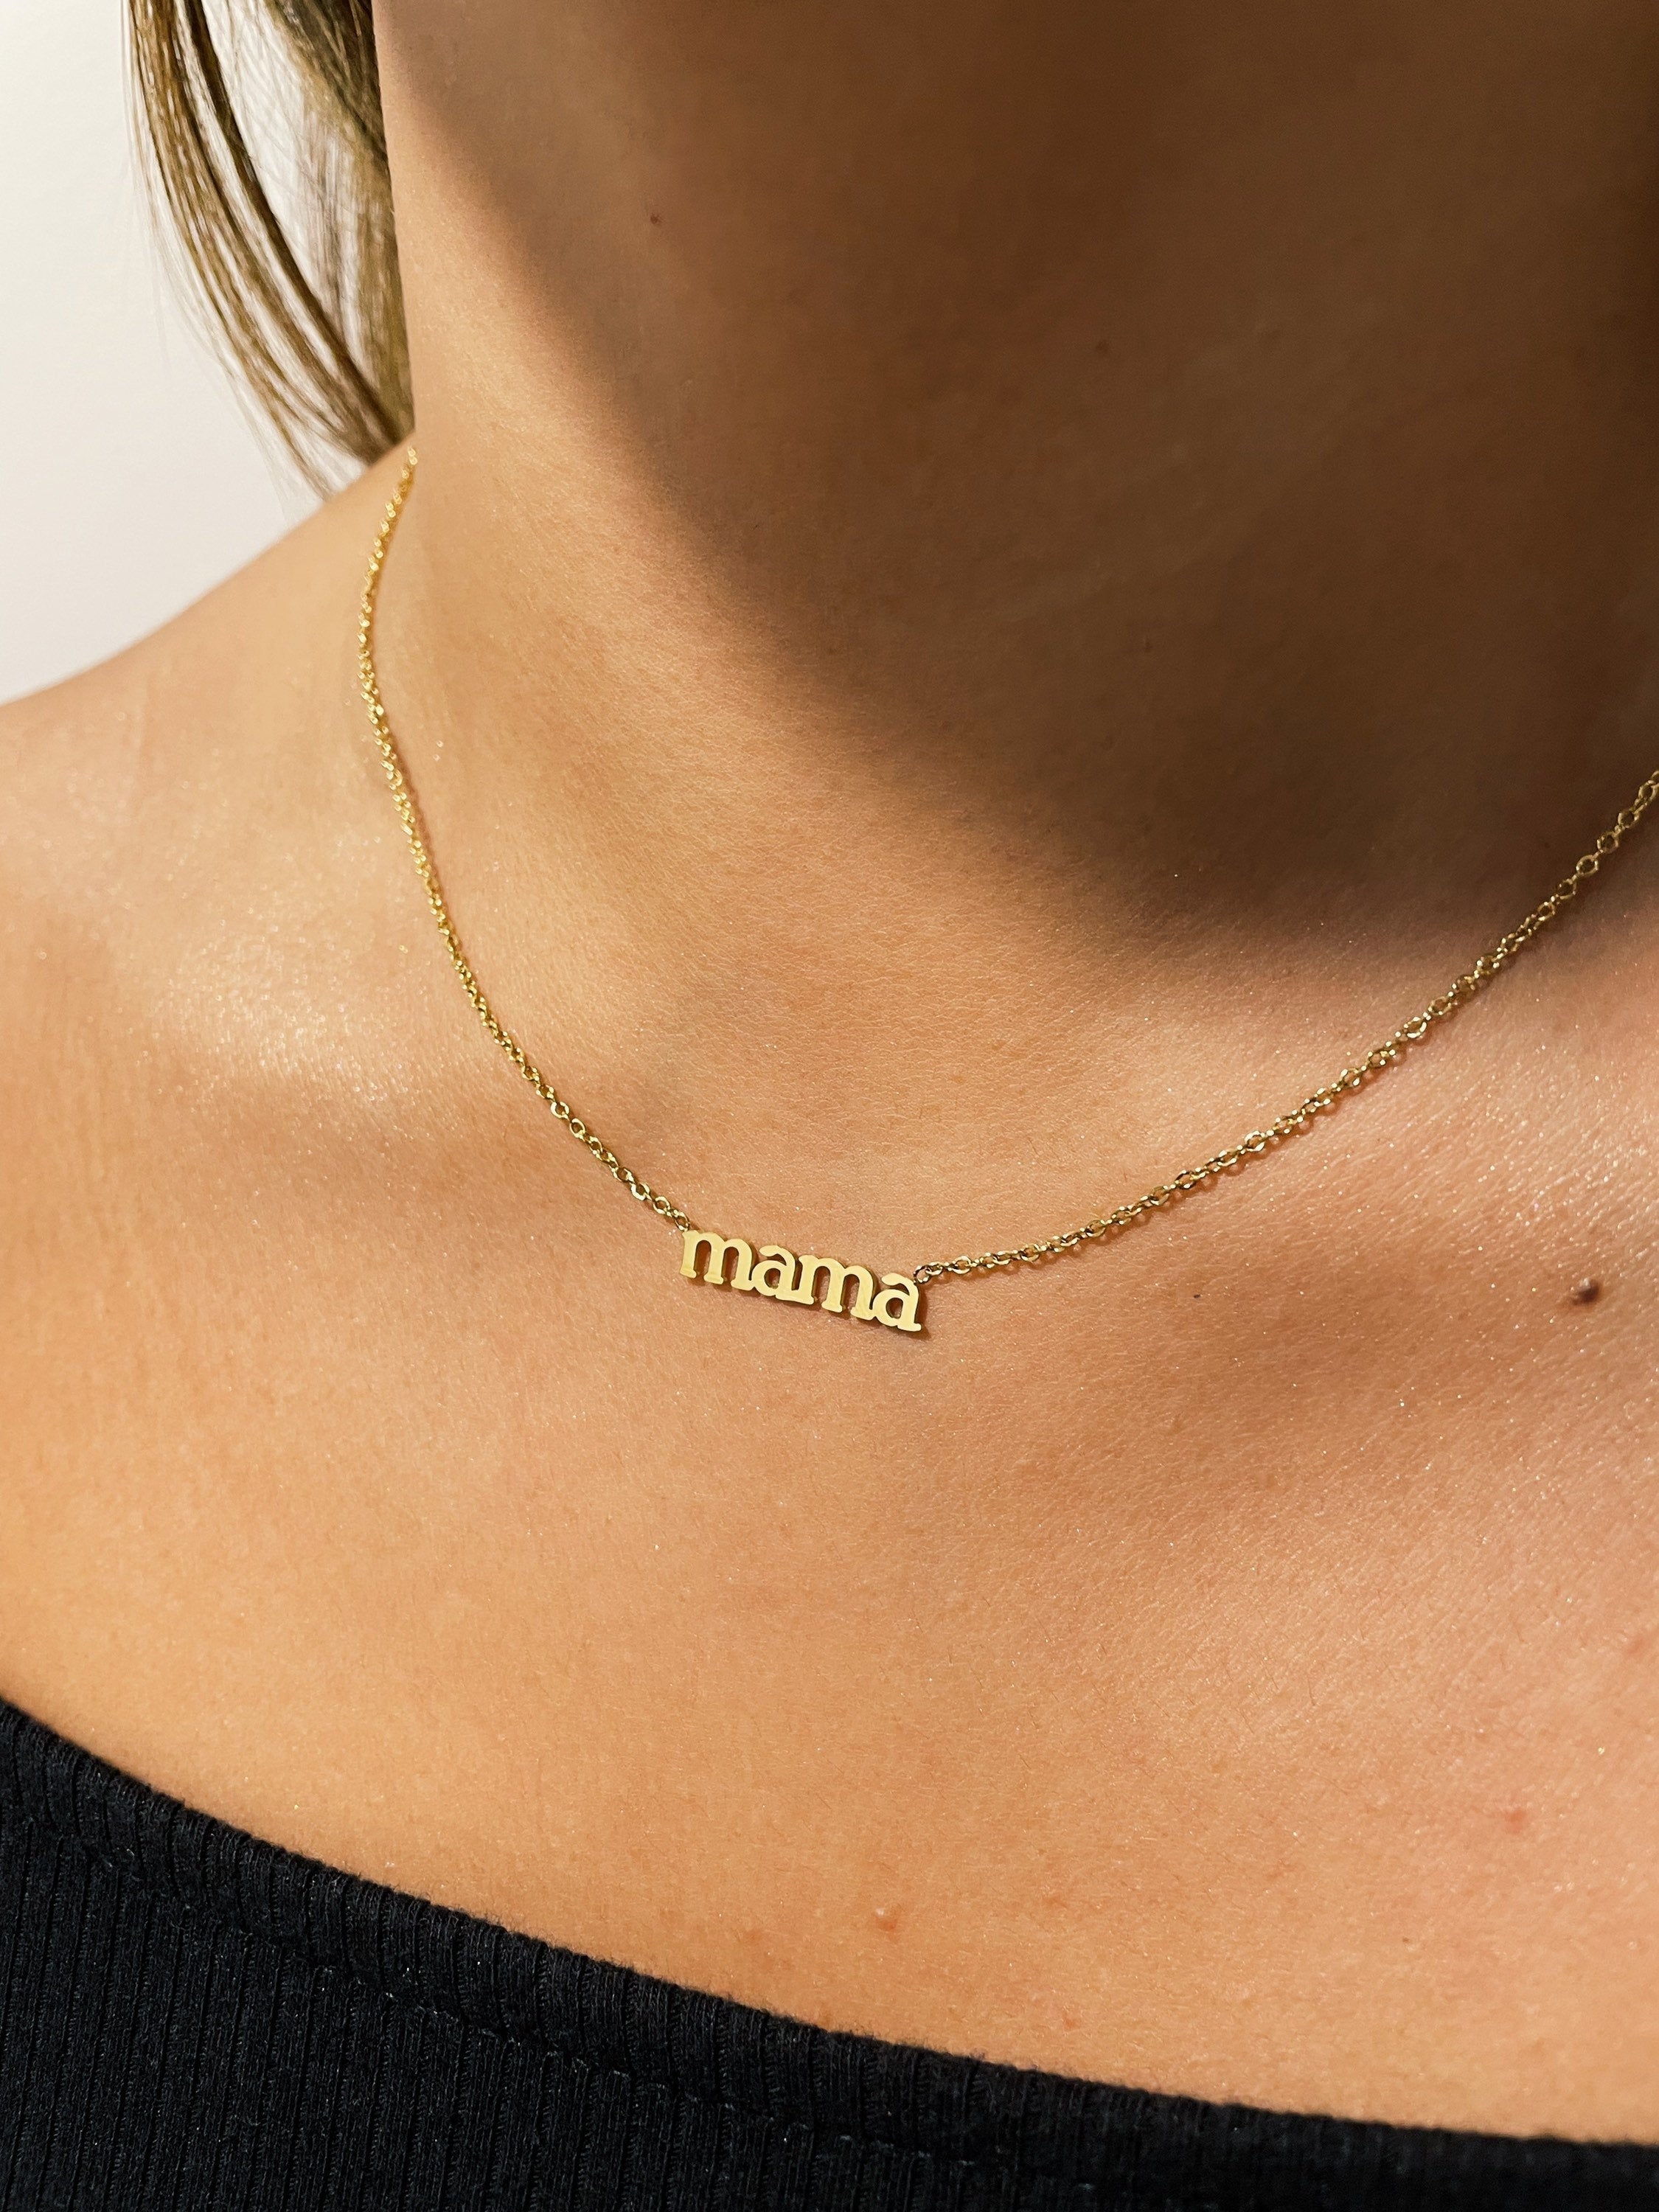 Buy 18K Gold Mama Necklace, Gift for Mom, Mom Necklace, Mother's Day Gift,  Gift for New Mom, New Mom Gifts, Minimalist Necklaces for Mother Online in  India - Etsy